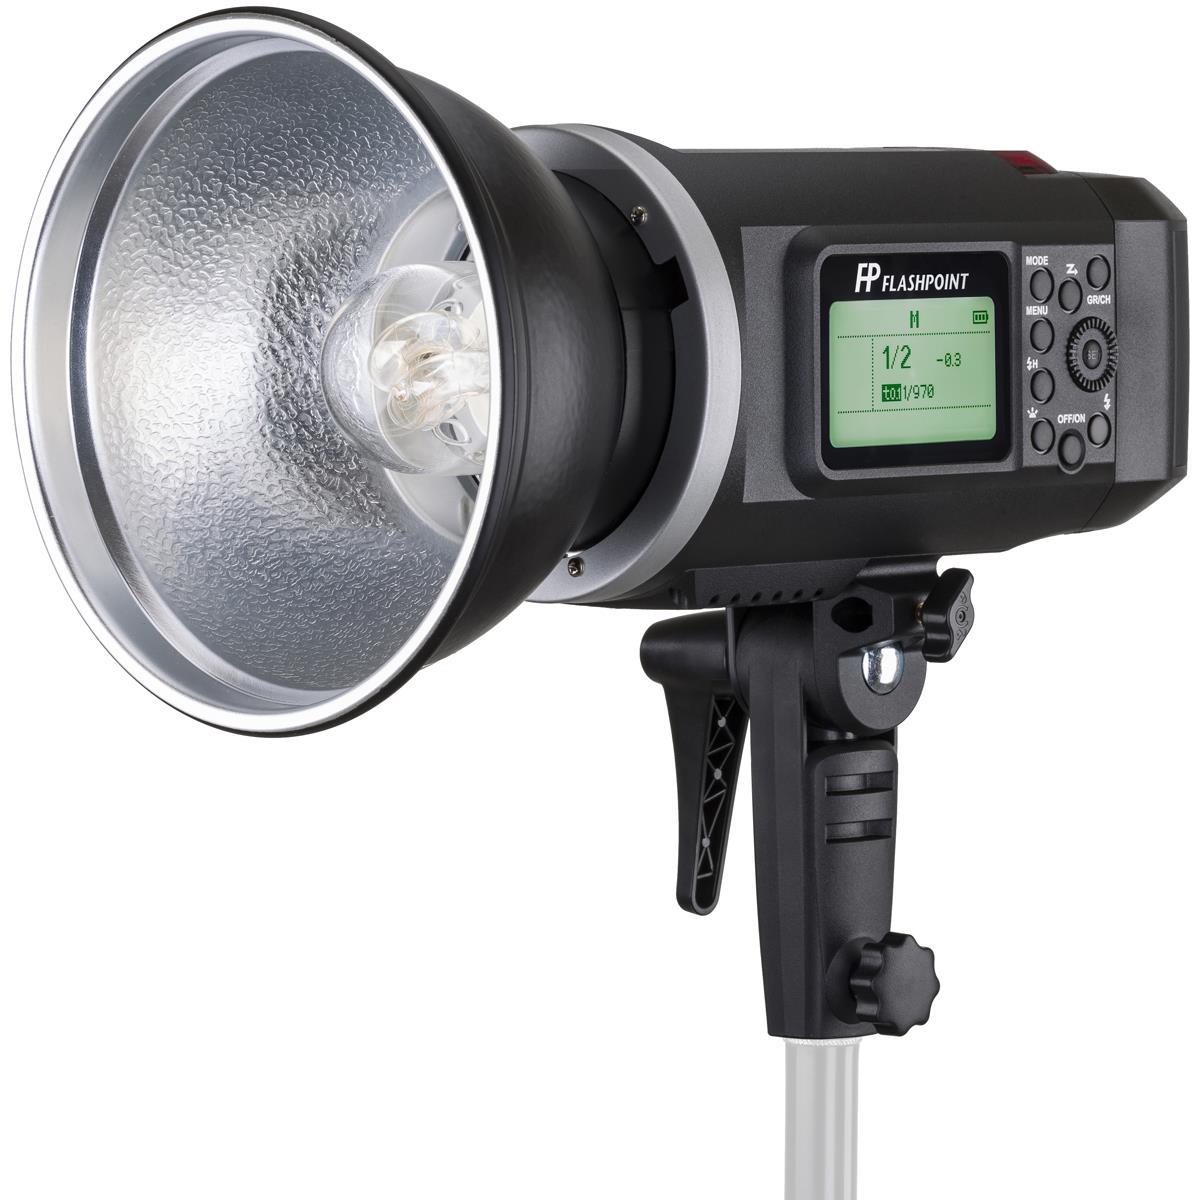 Flashpoint XPLOR 600 HSS Monolight with Remote for $339 Shipped